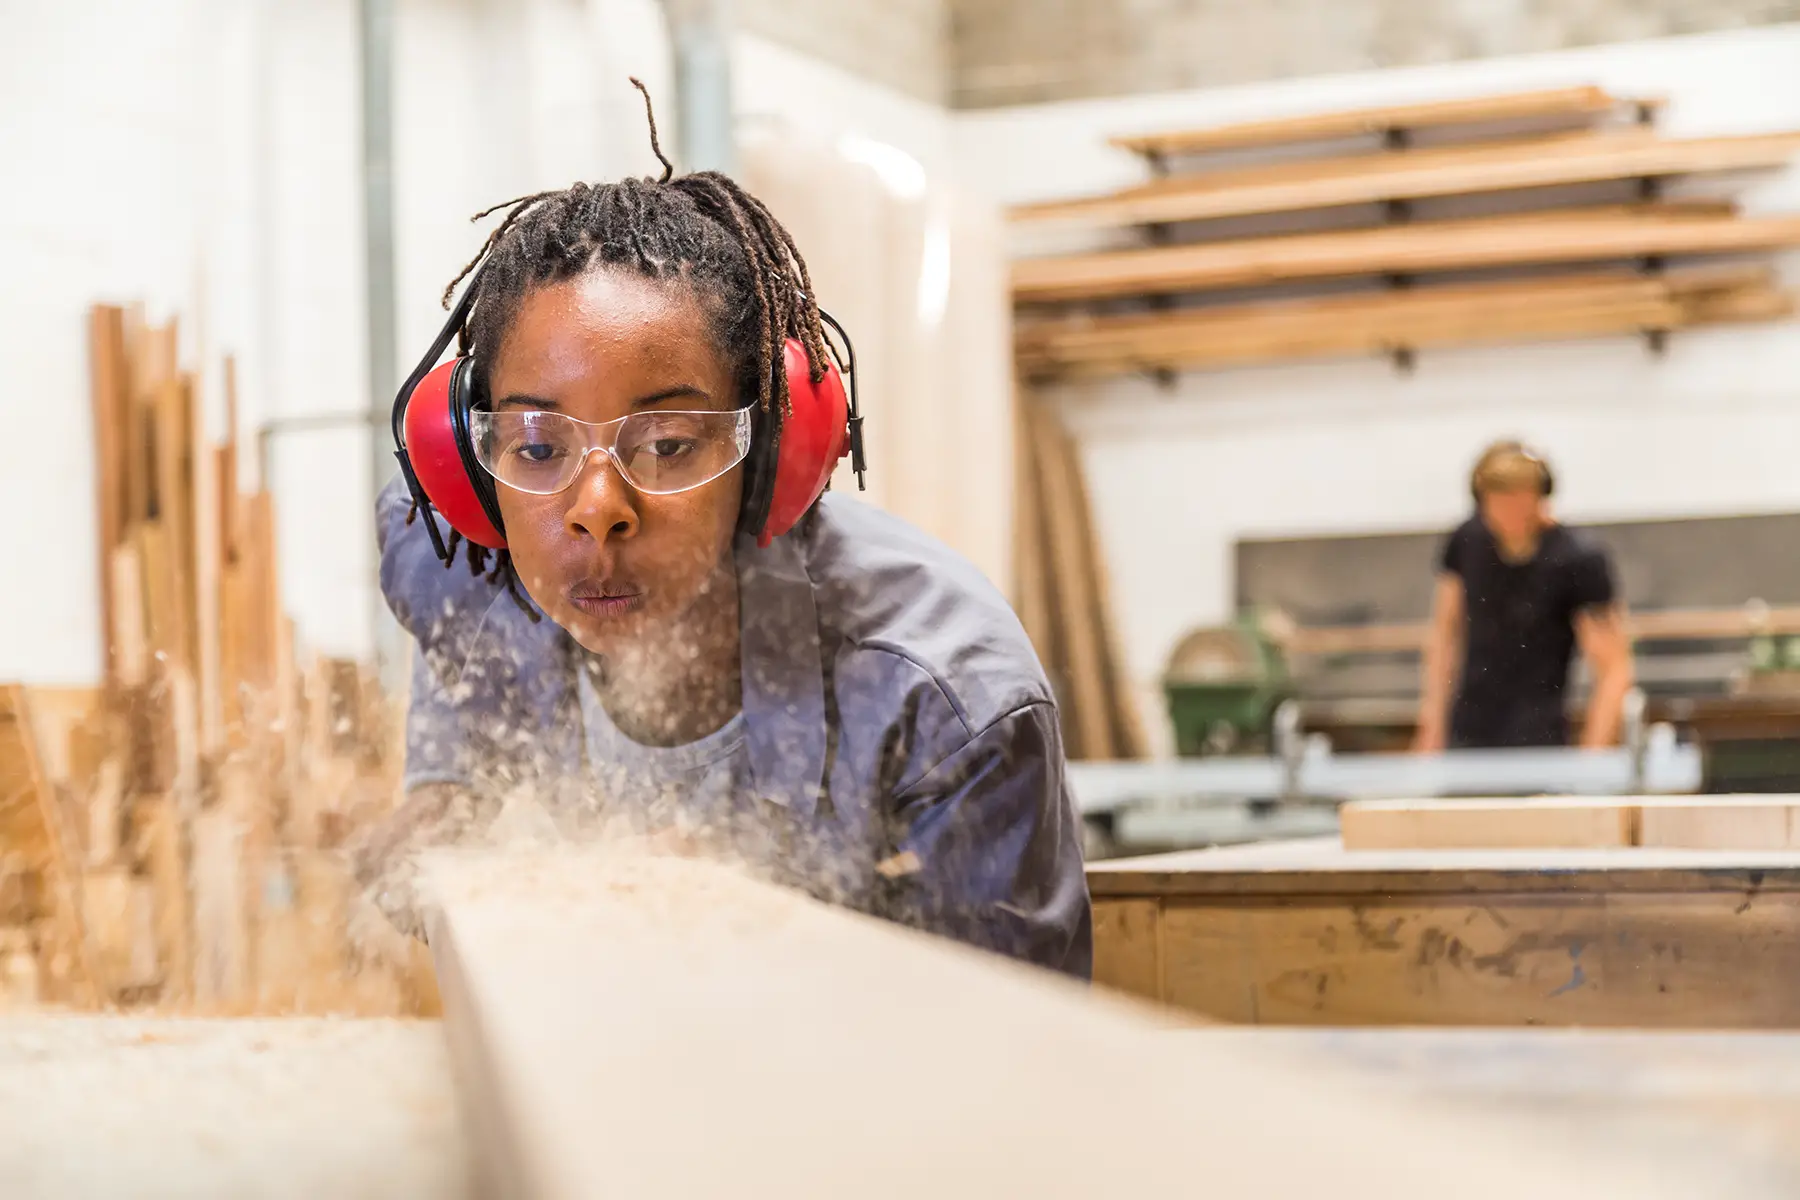 Secondary student in trade school doing carpentry, blowing wood dust